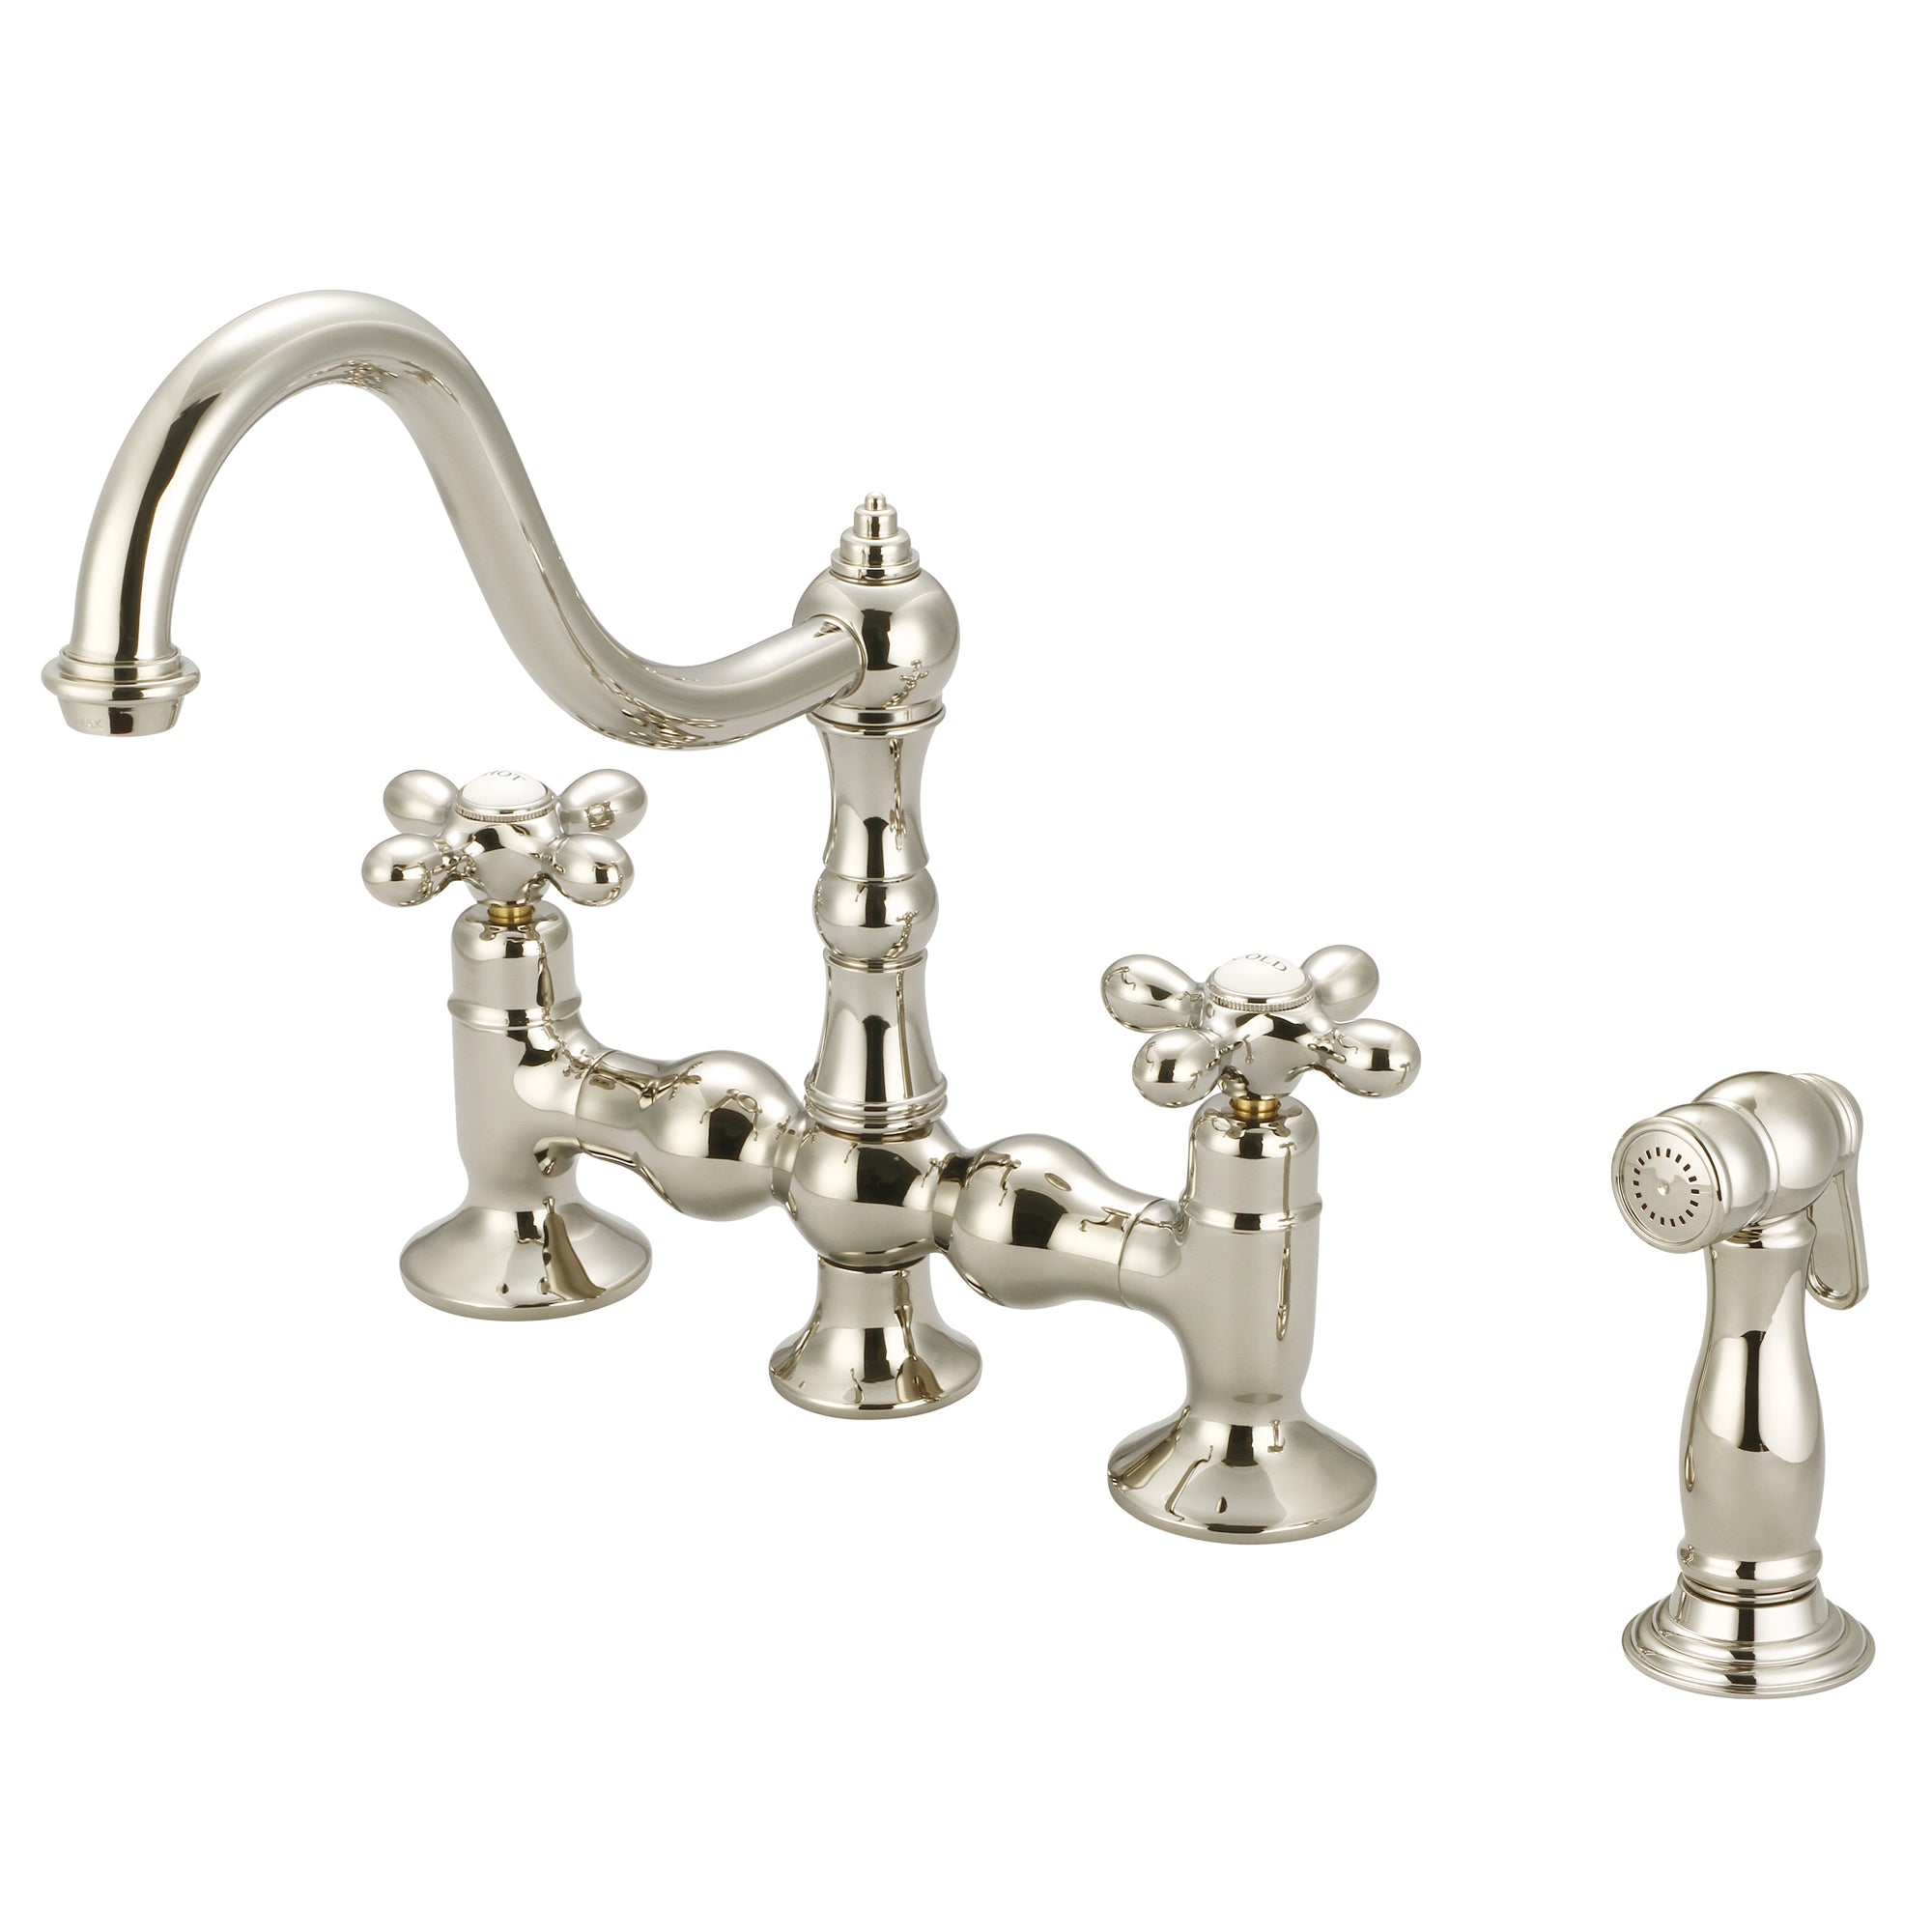 Water Creation | Bridge Style Kitchen Faucet With Side Spray To Match in Polished Nickel (PVD) Finish With Metal Lever Handles, Hot And Cold Labels Included | F5-0010-05-AX